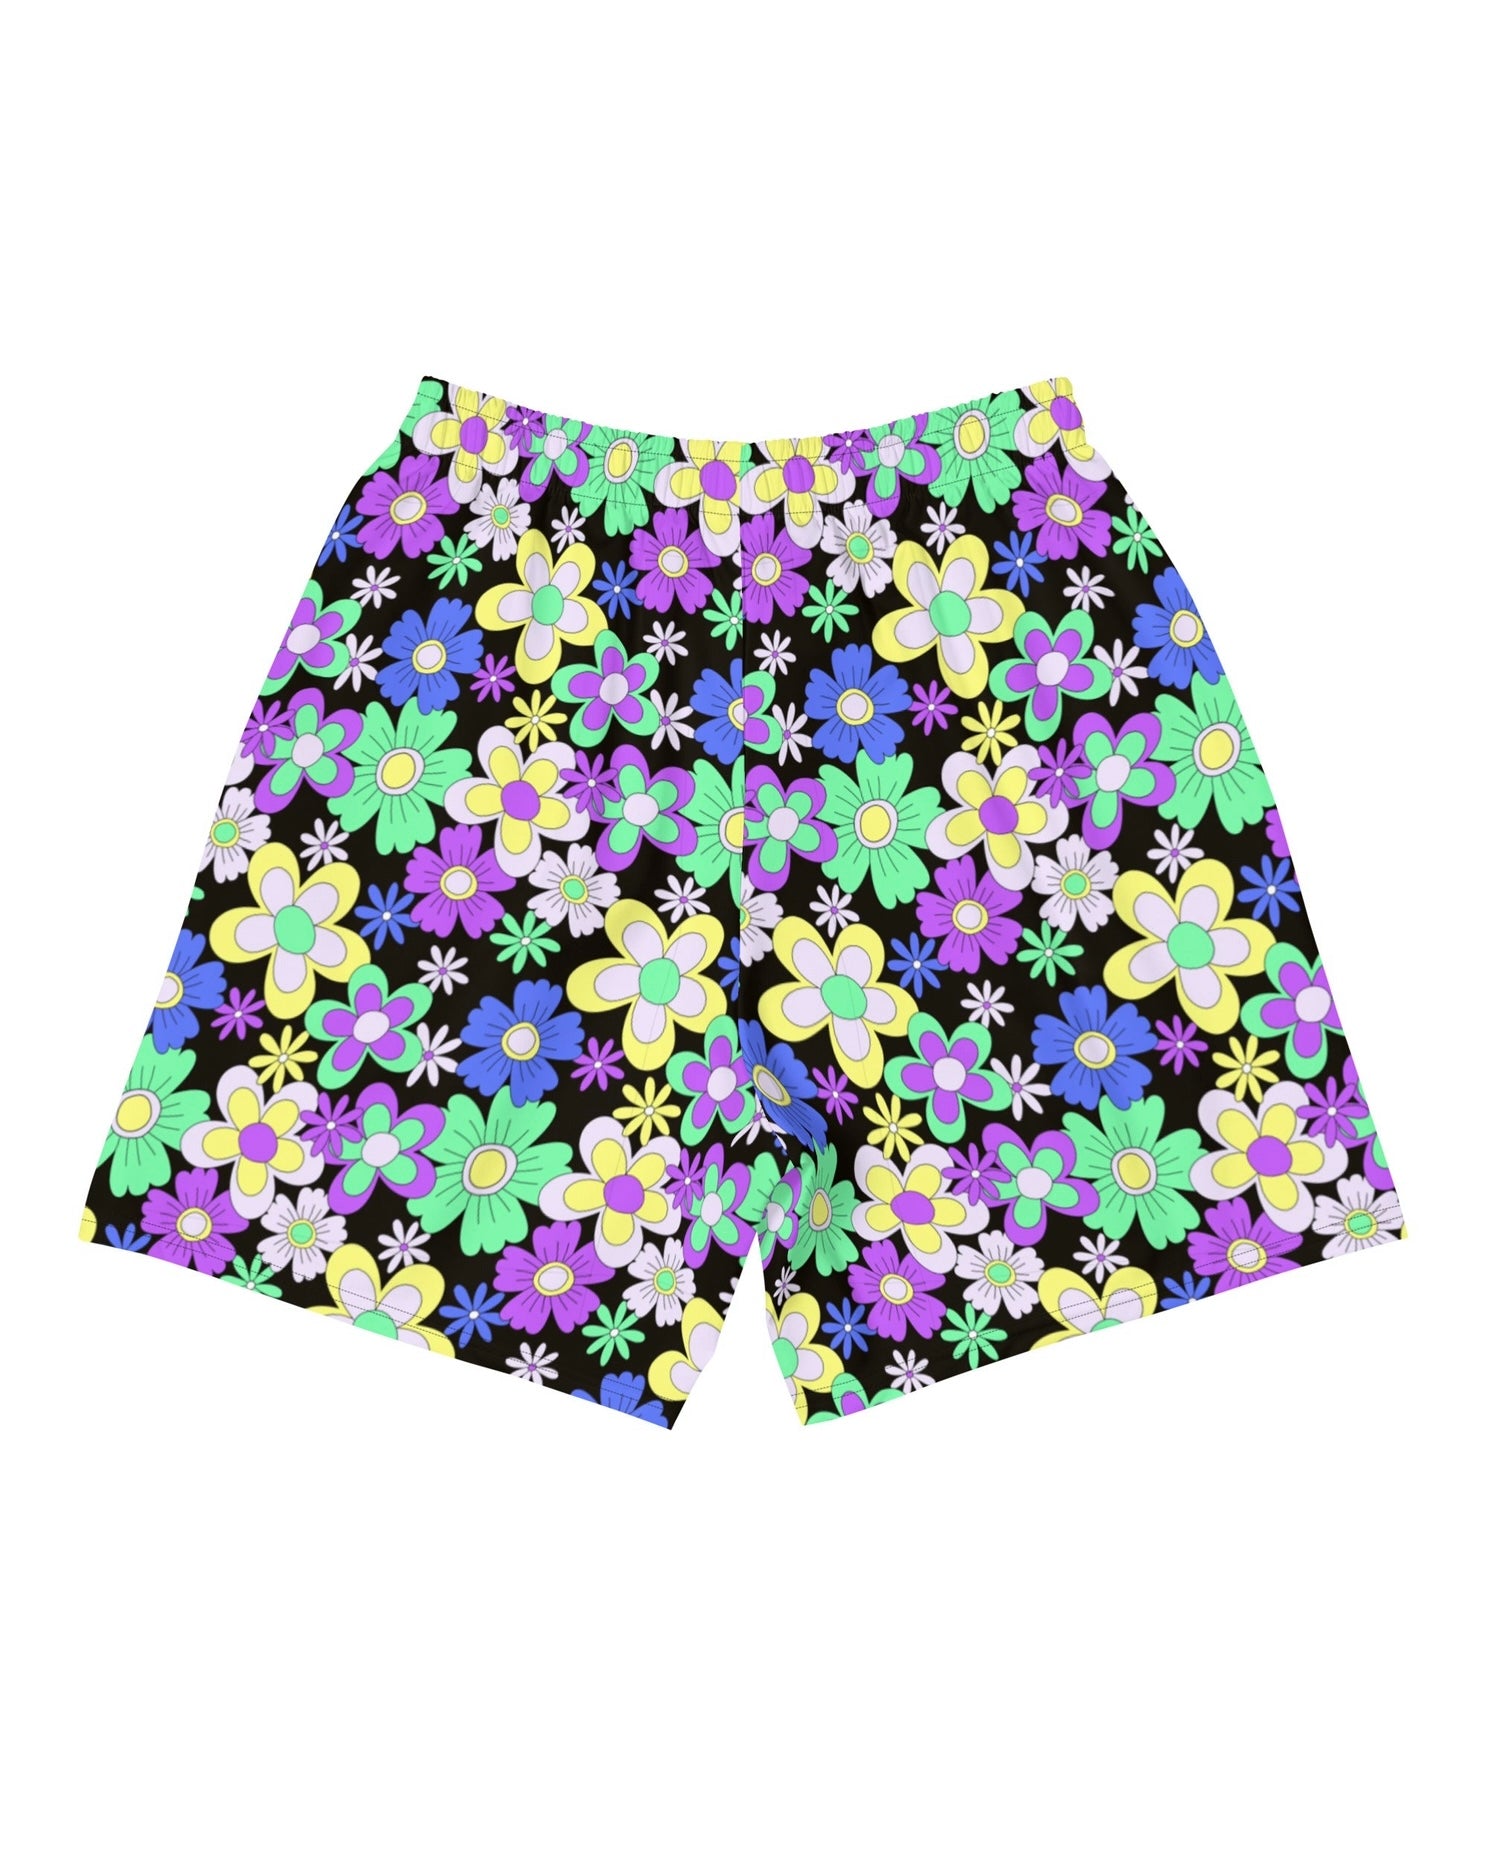 Crazy Daisy Recycled Athletic Shorts, Athletic Shorts, - One Stop Rave